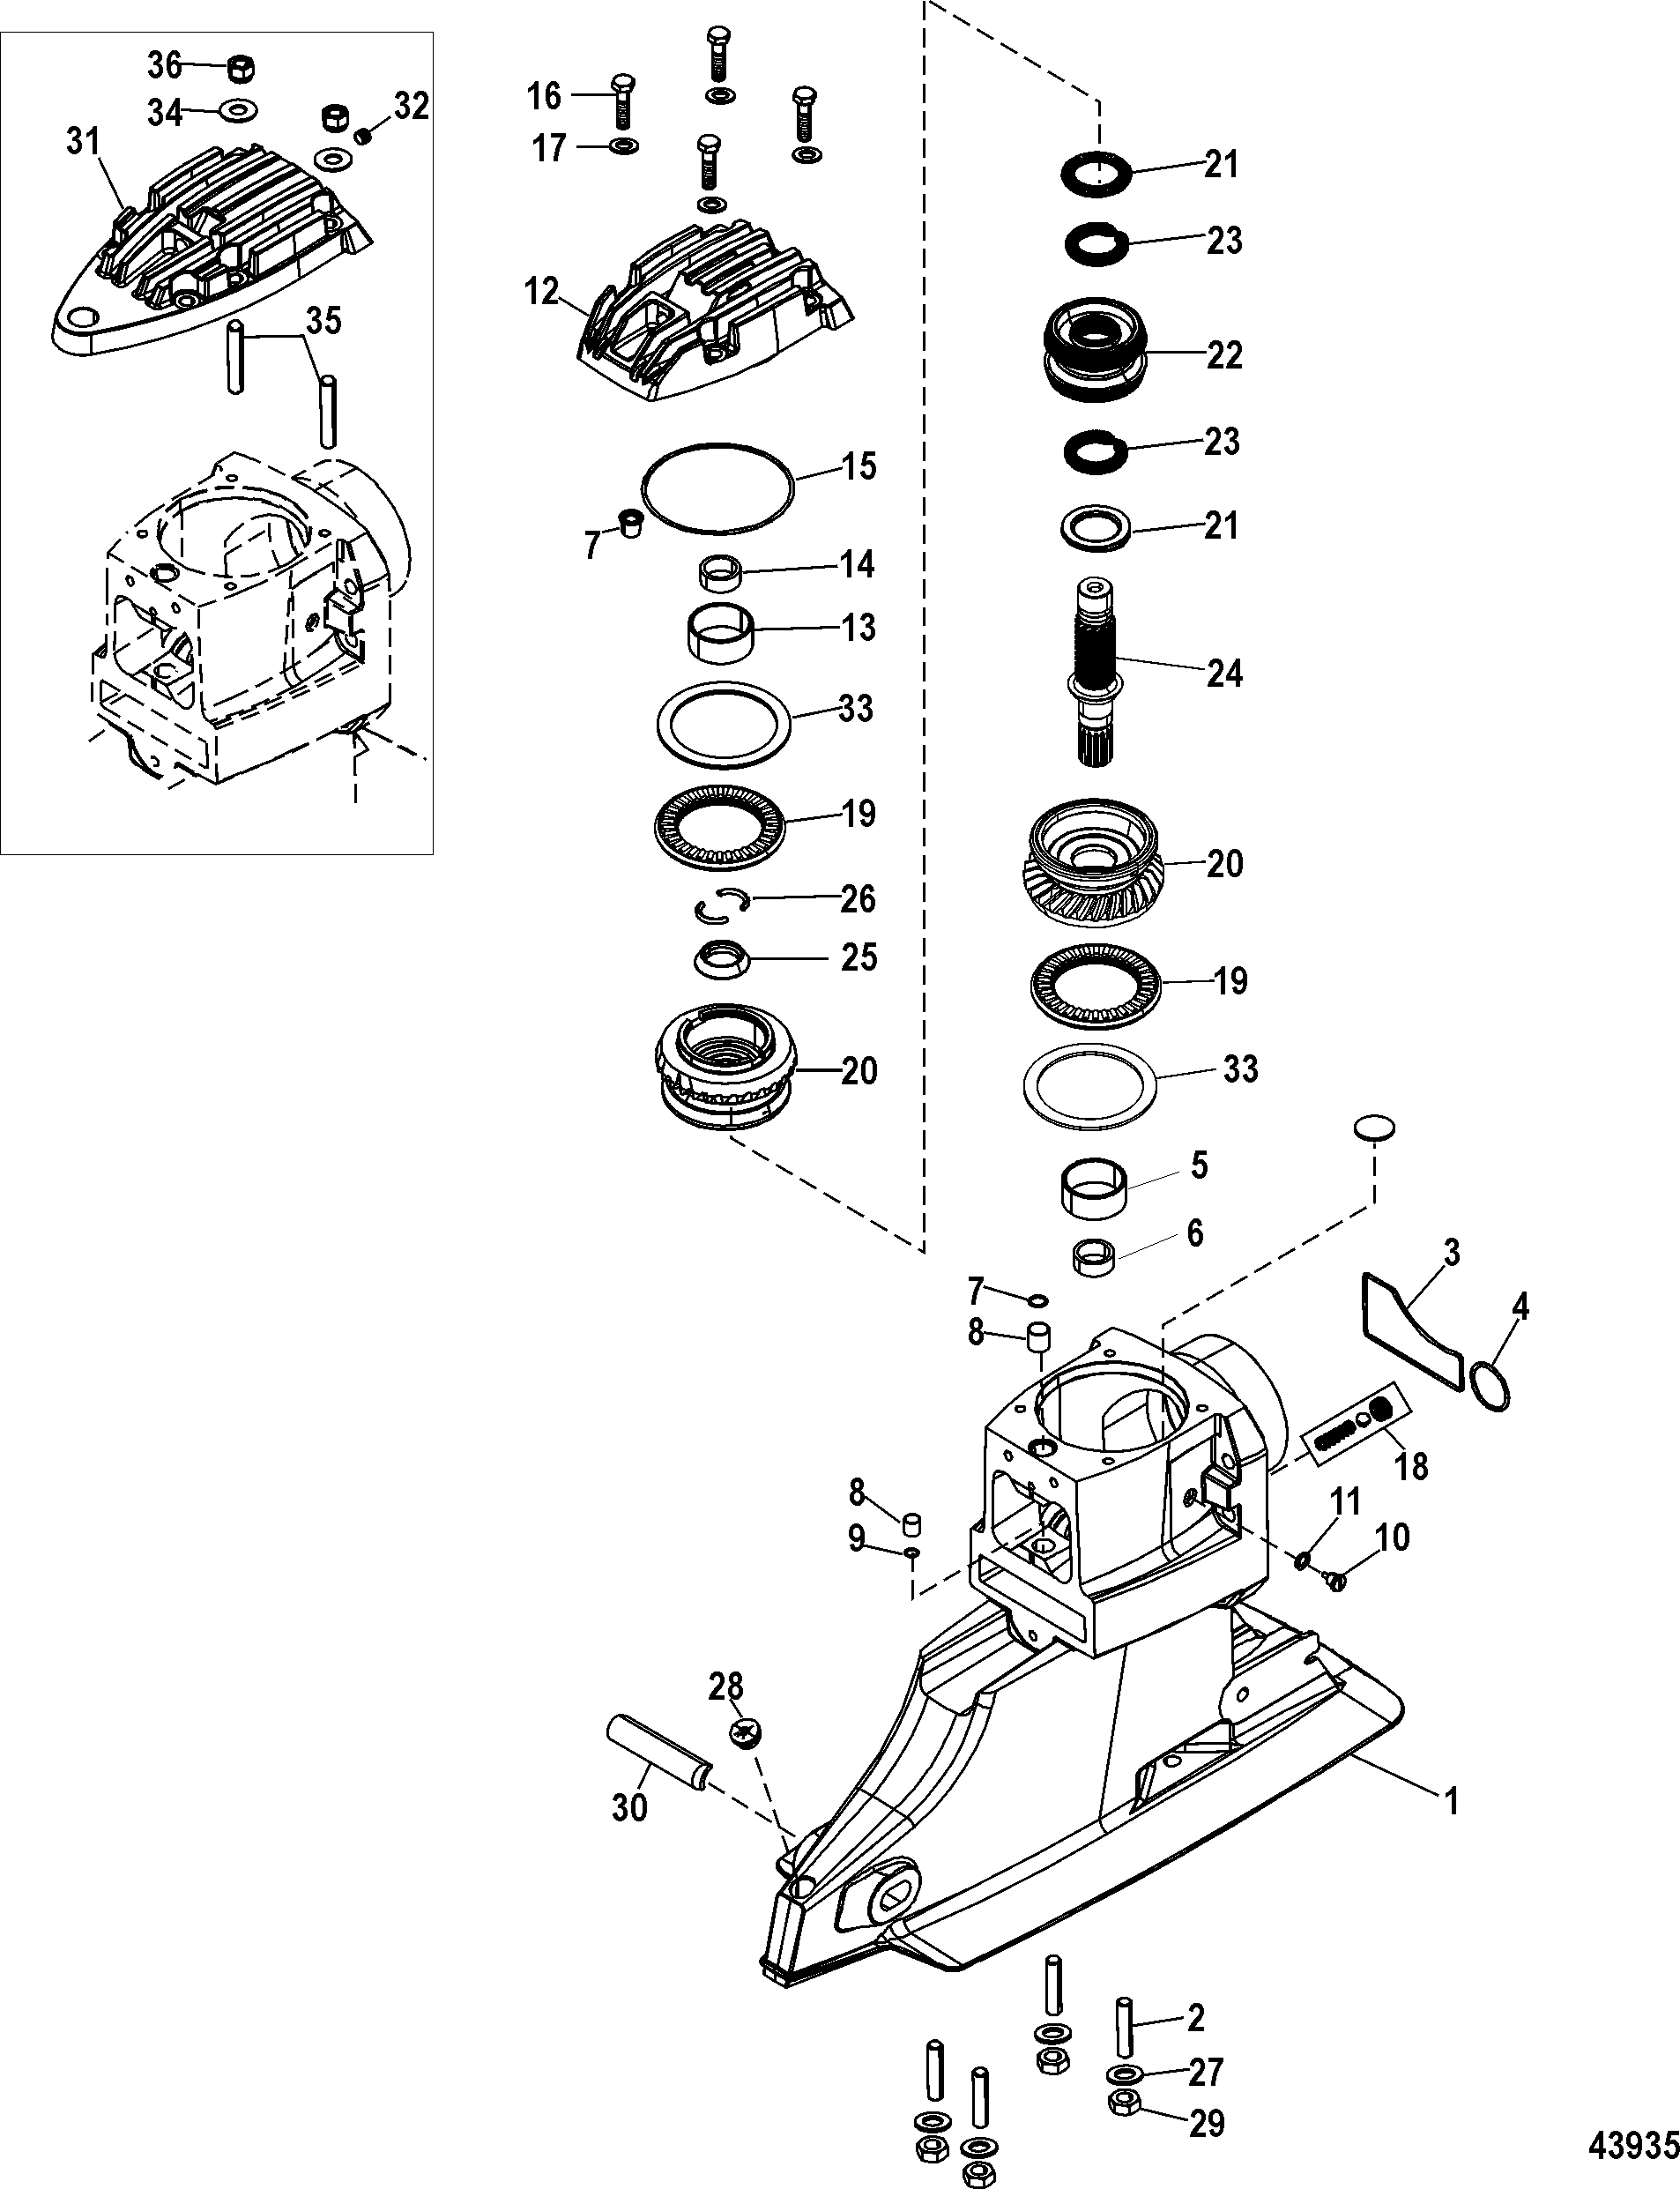 Driveshaft Housing and Drive Gears